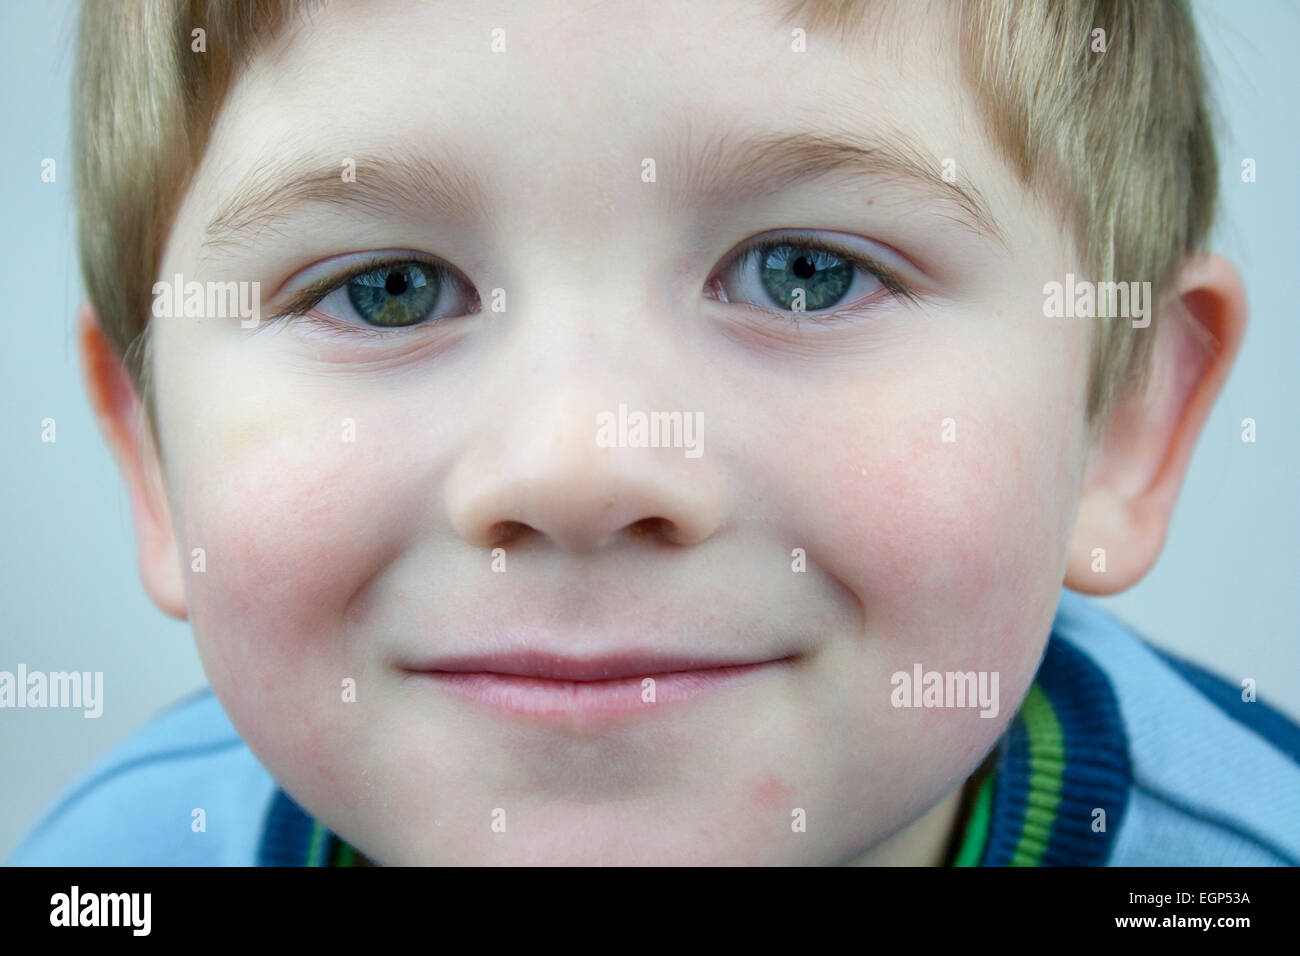 5 year old boy face shots close up expression Stock Photo